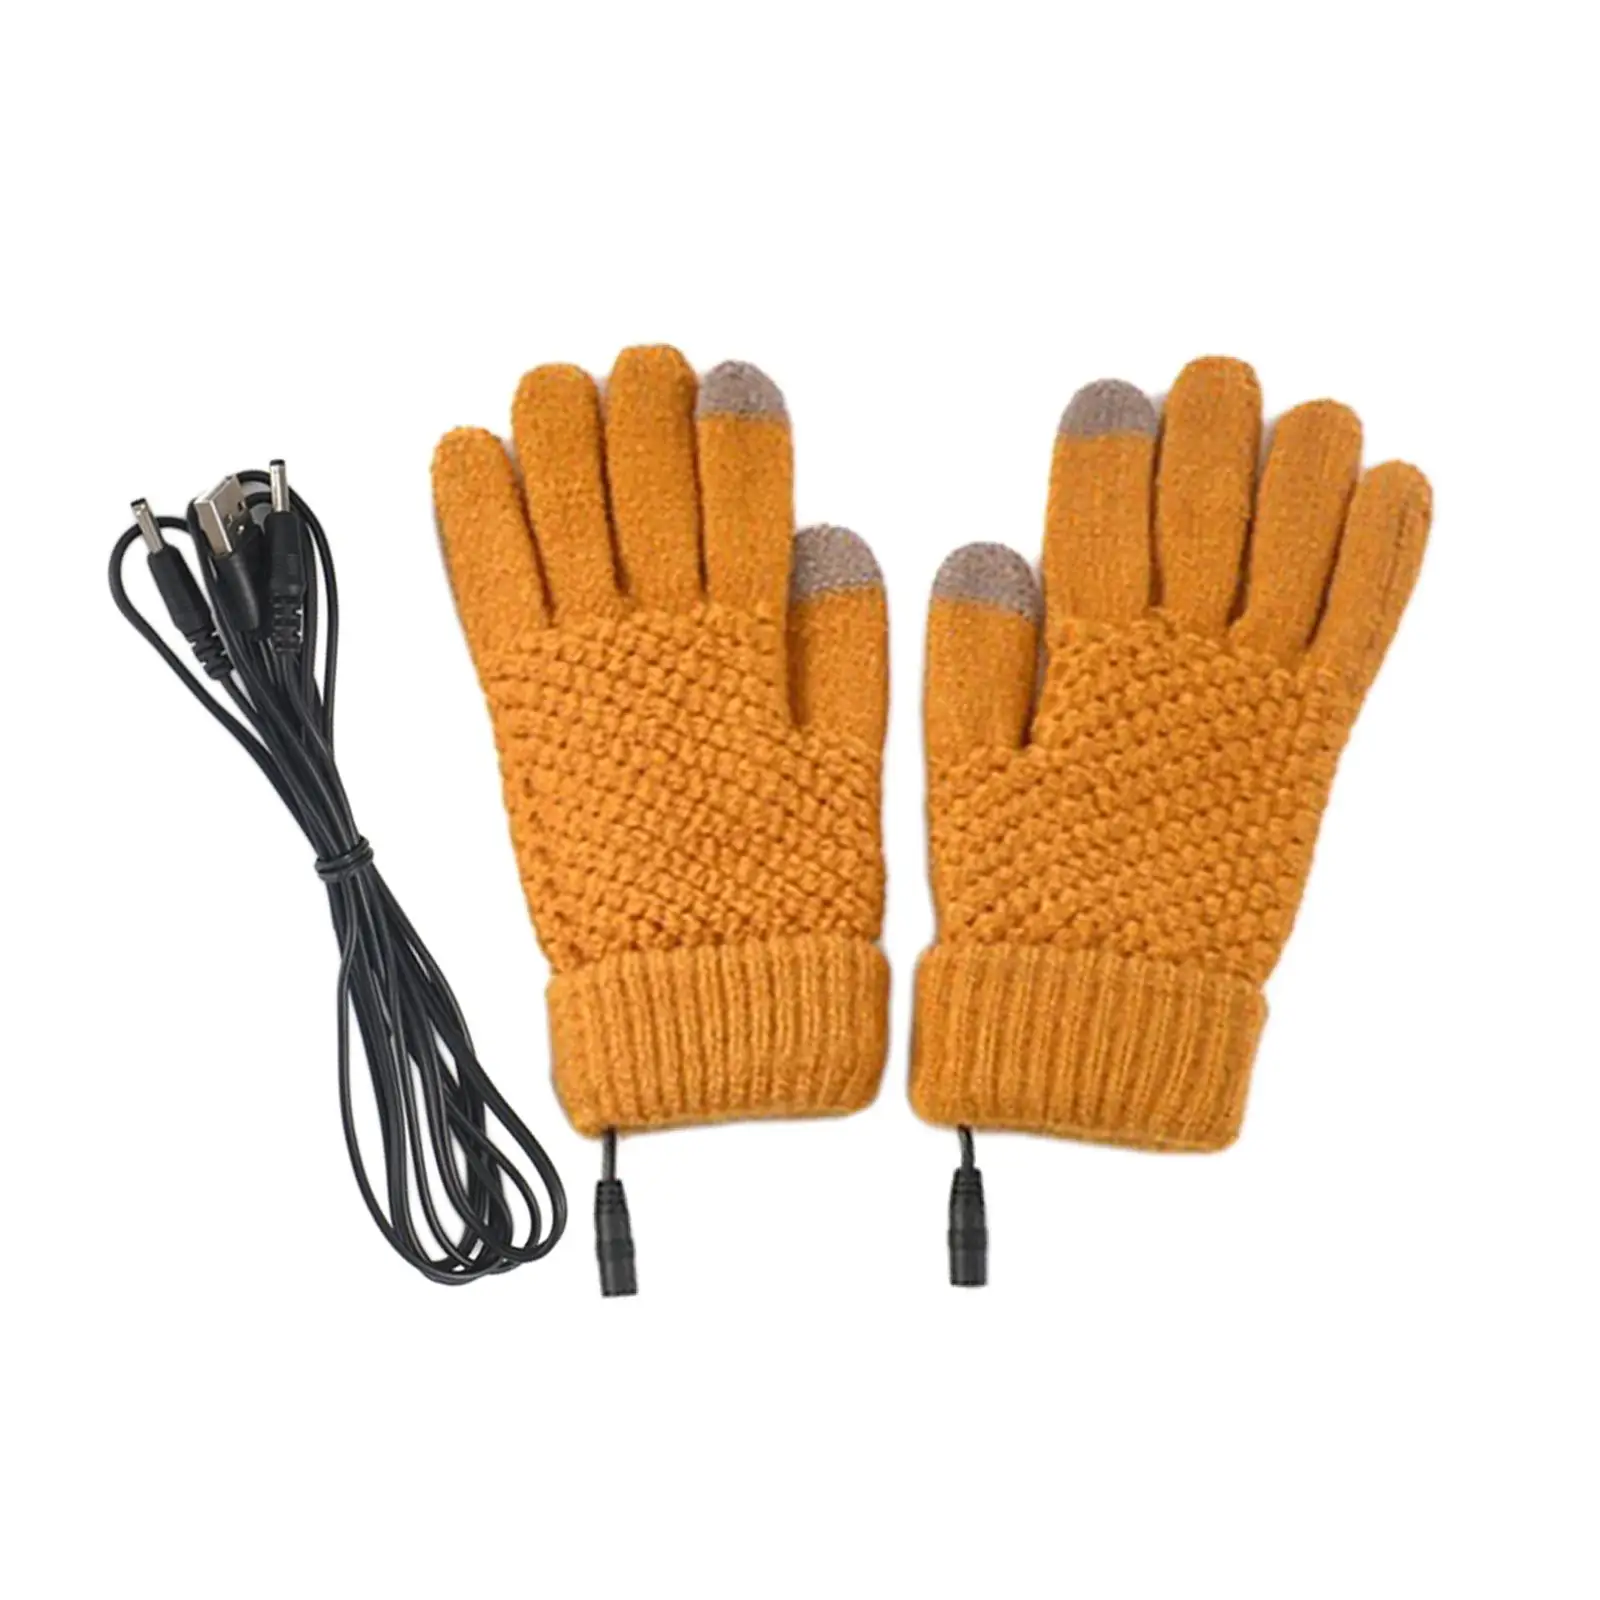 USB Heated Gloves Connected to Laptop Adapter for Power Washable Heating Mittens for Outdoor Skiing Camping Typing Winter Gift